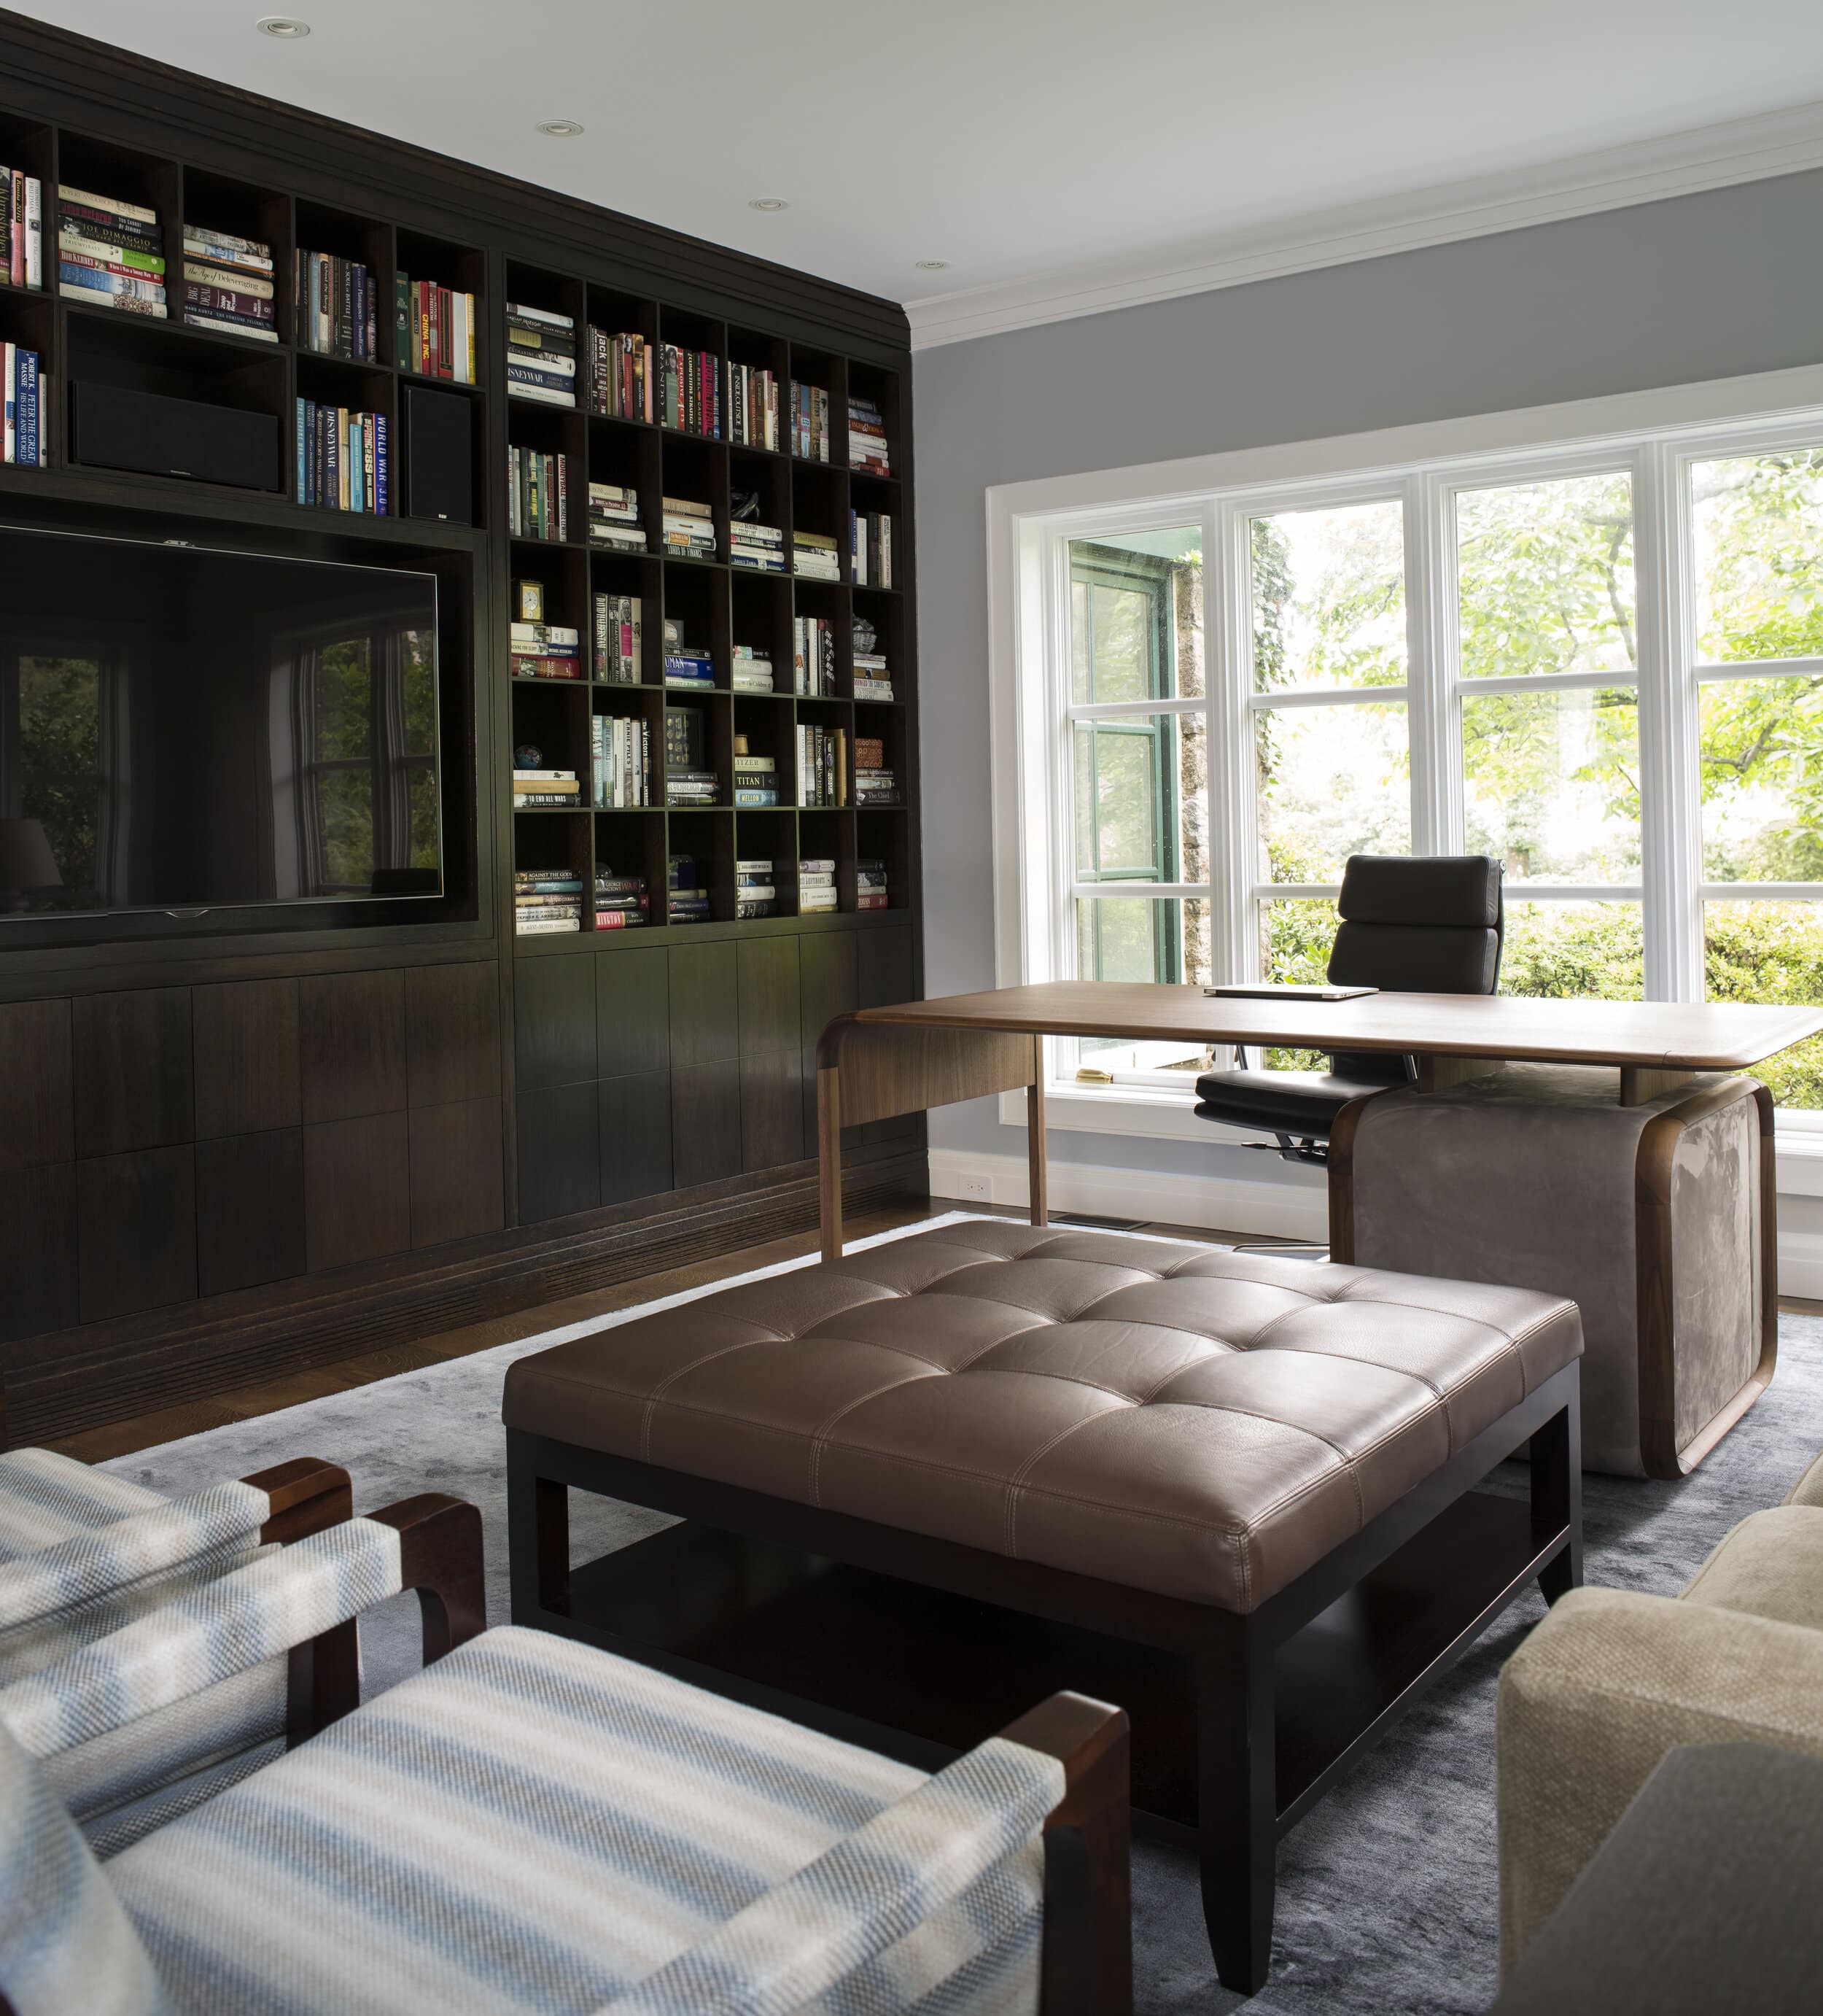 From our Project Stratford, the family den becomes a fully functional home office!